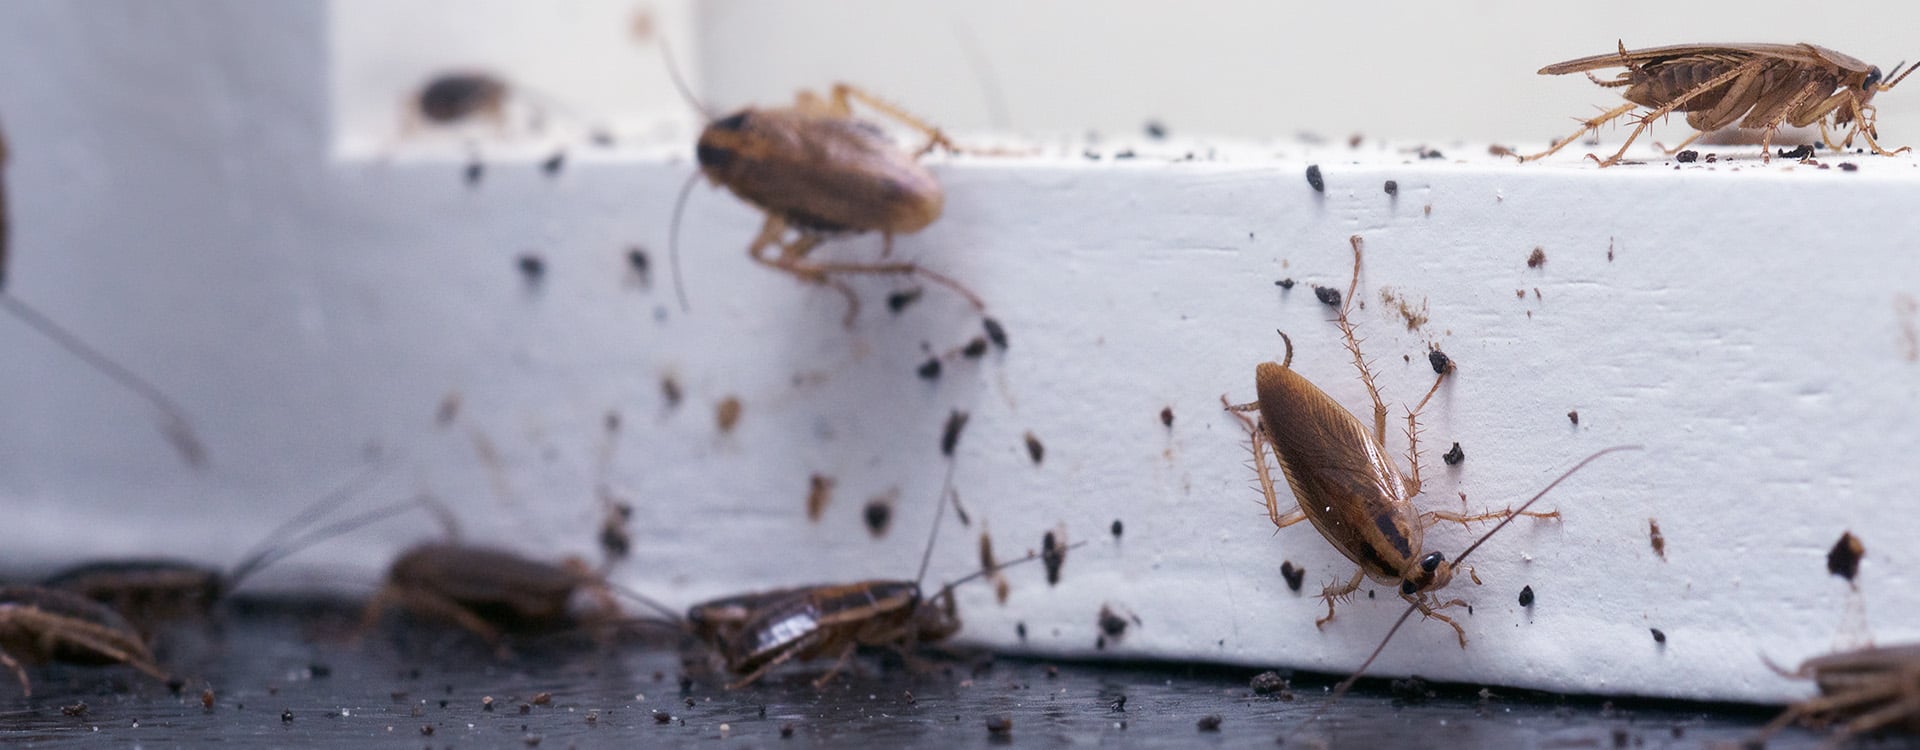 German cockroaches inside florida home